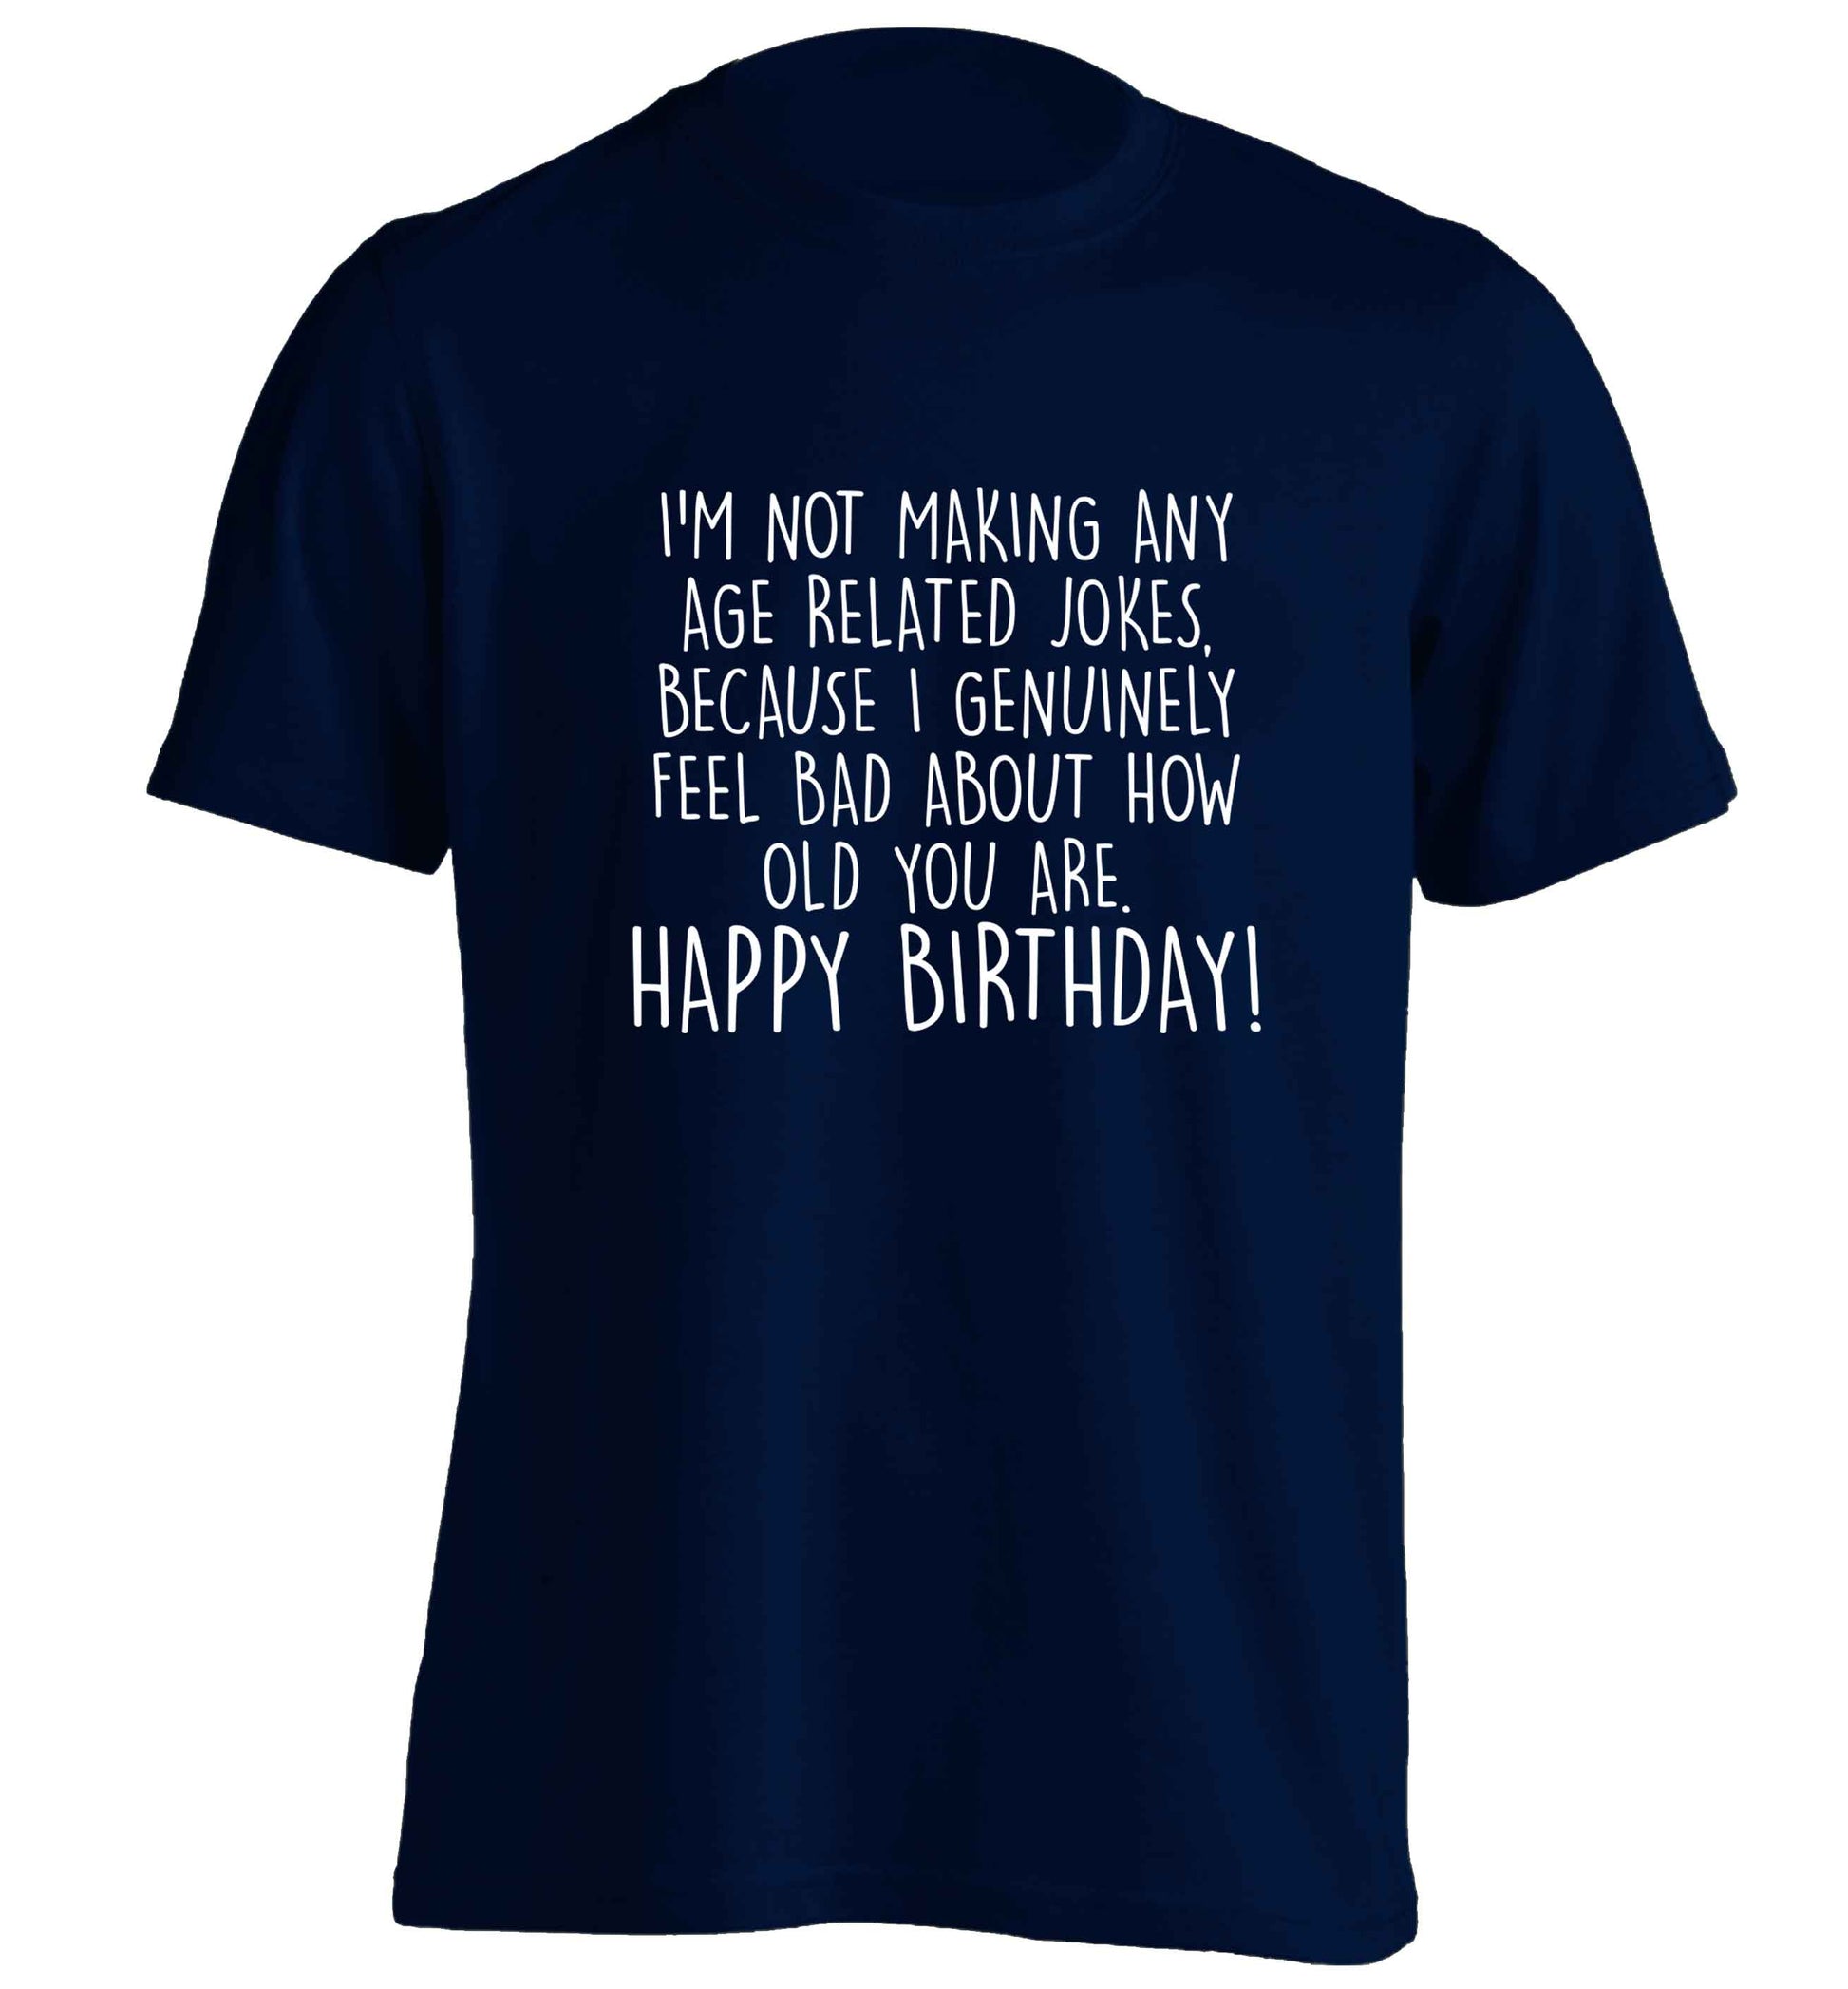 I'm not making any age related jokes because I genuinely feel bad for how old you are adults unisex navy Tshirt 2XL